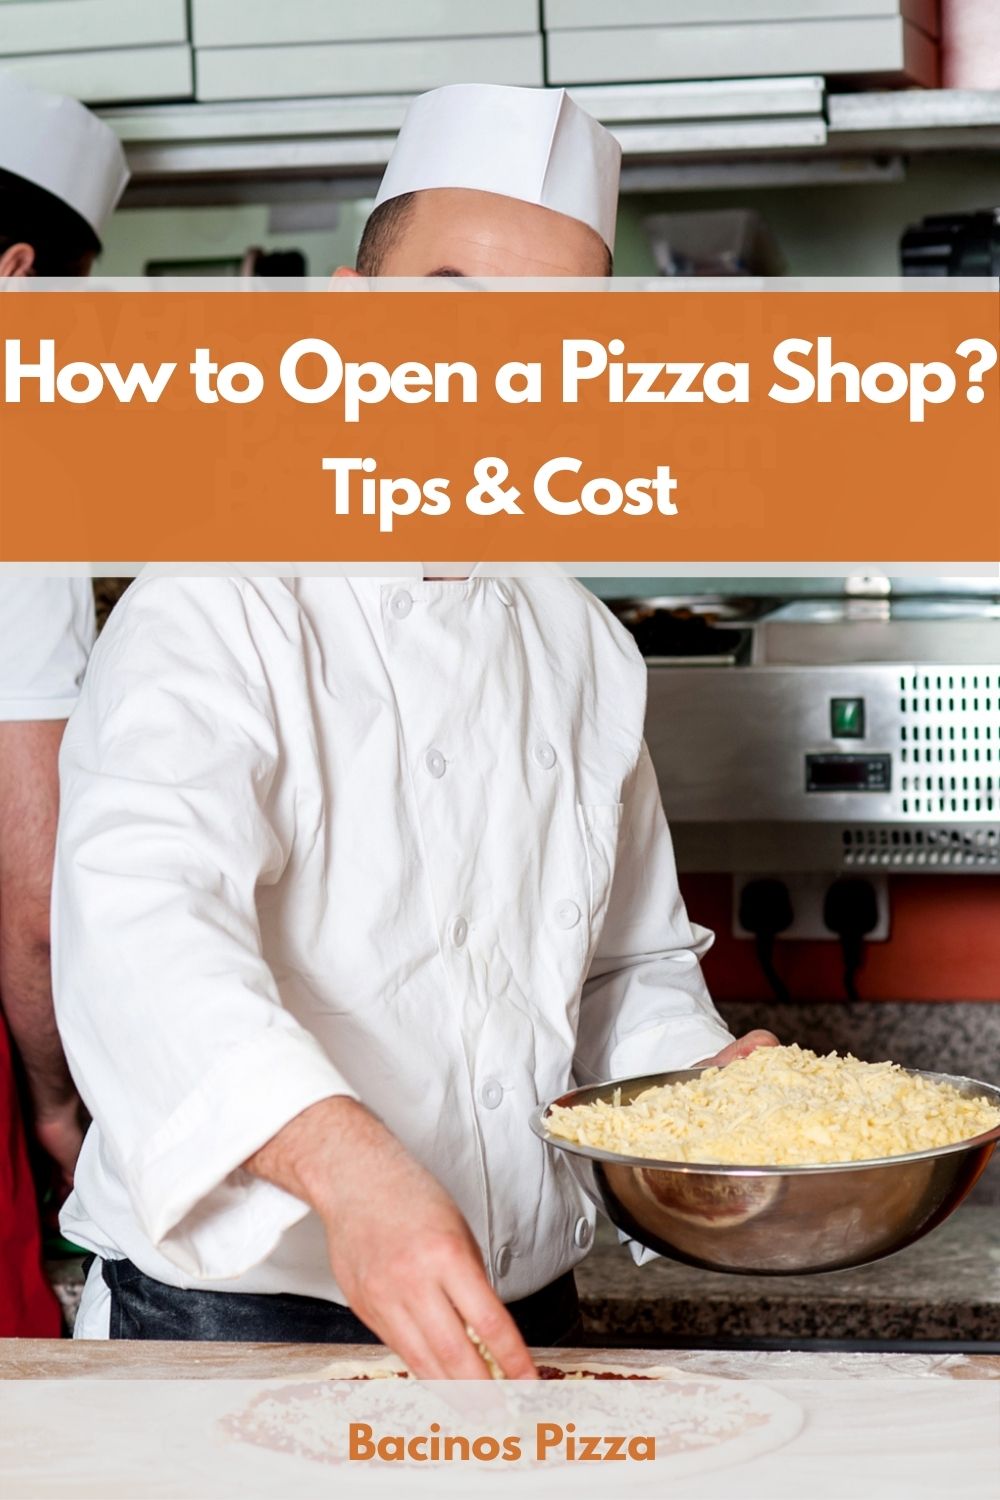 How to Open a Pizza Shop pin 2